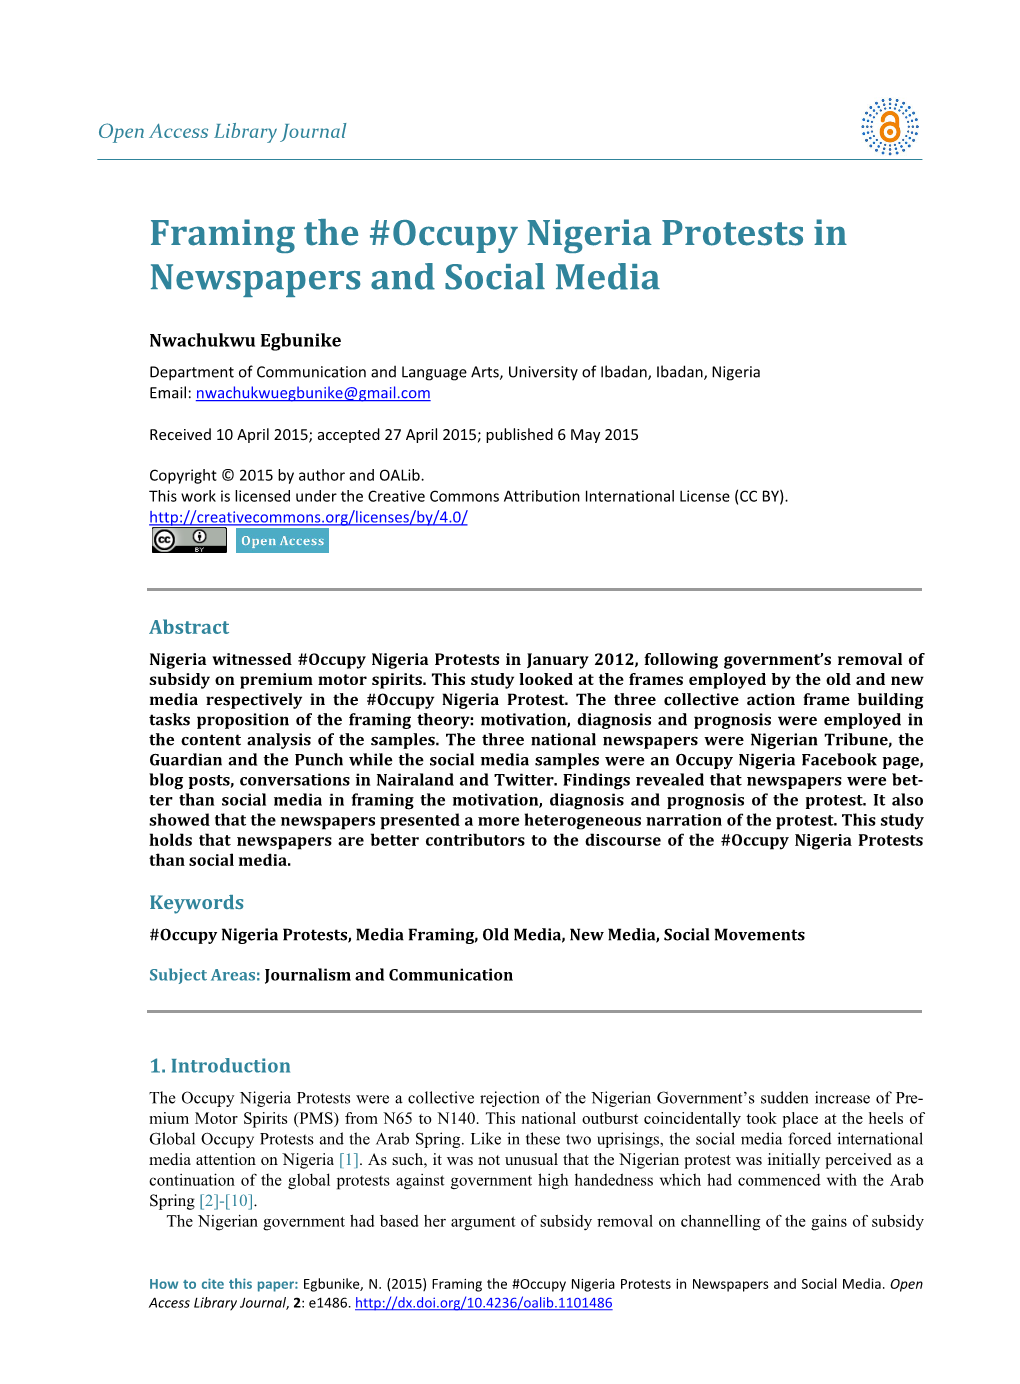 Framing the #Occupy Nigeria Protests in Newspapers and Social Media